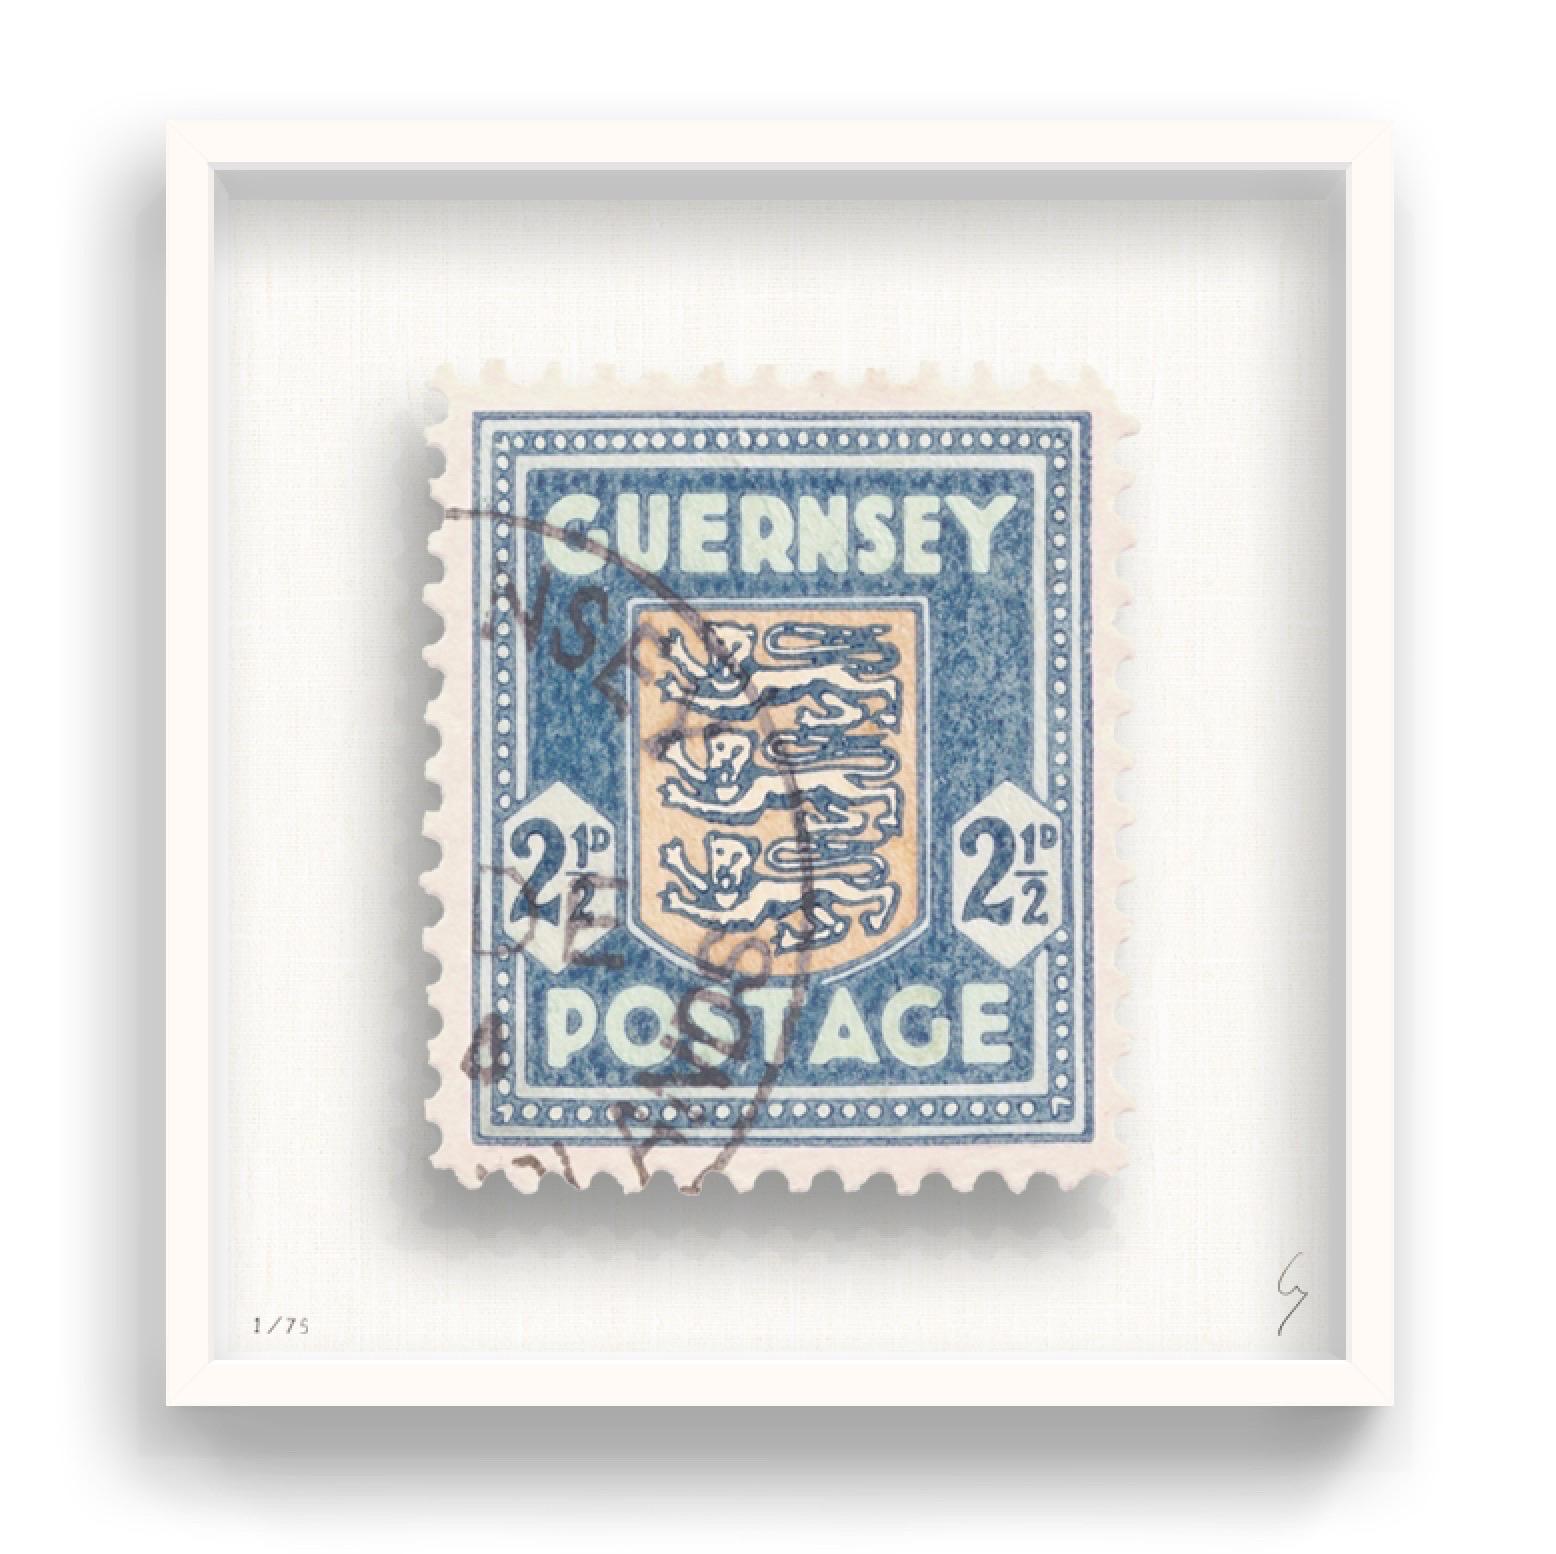 Guy Gee, Guernsey  (medium)

Hand-engraved print on 350gsm on G.F Smith card
53 x 56cm (20 4/5 x 22 2/5 in)
Frame included 
Edition of 75 

Each artwork by Guy had been digitally reimagined from an original postage stamp. Cut out and finished by